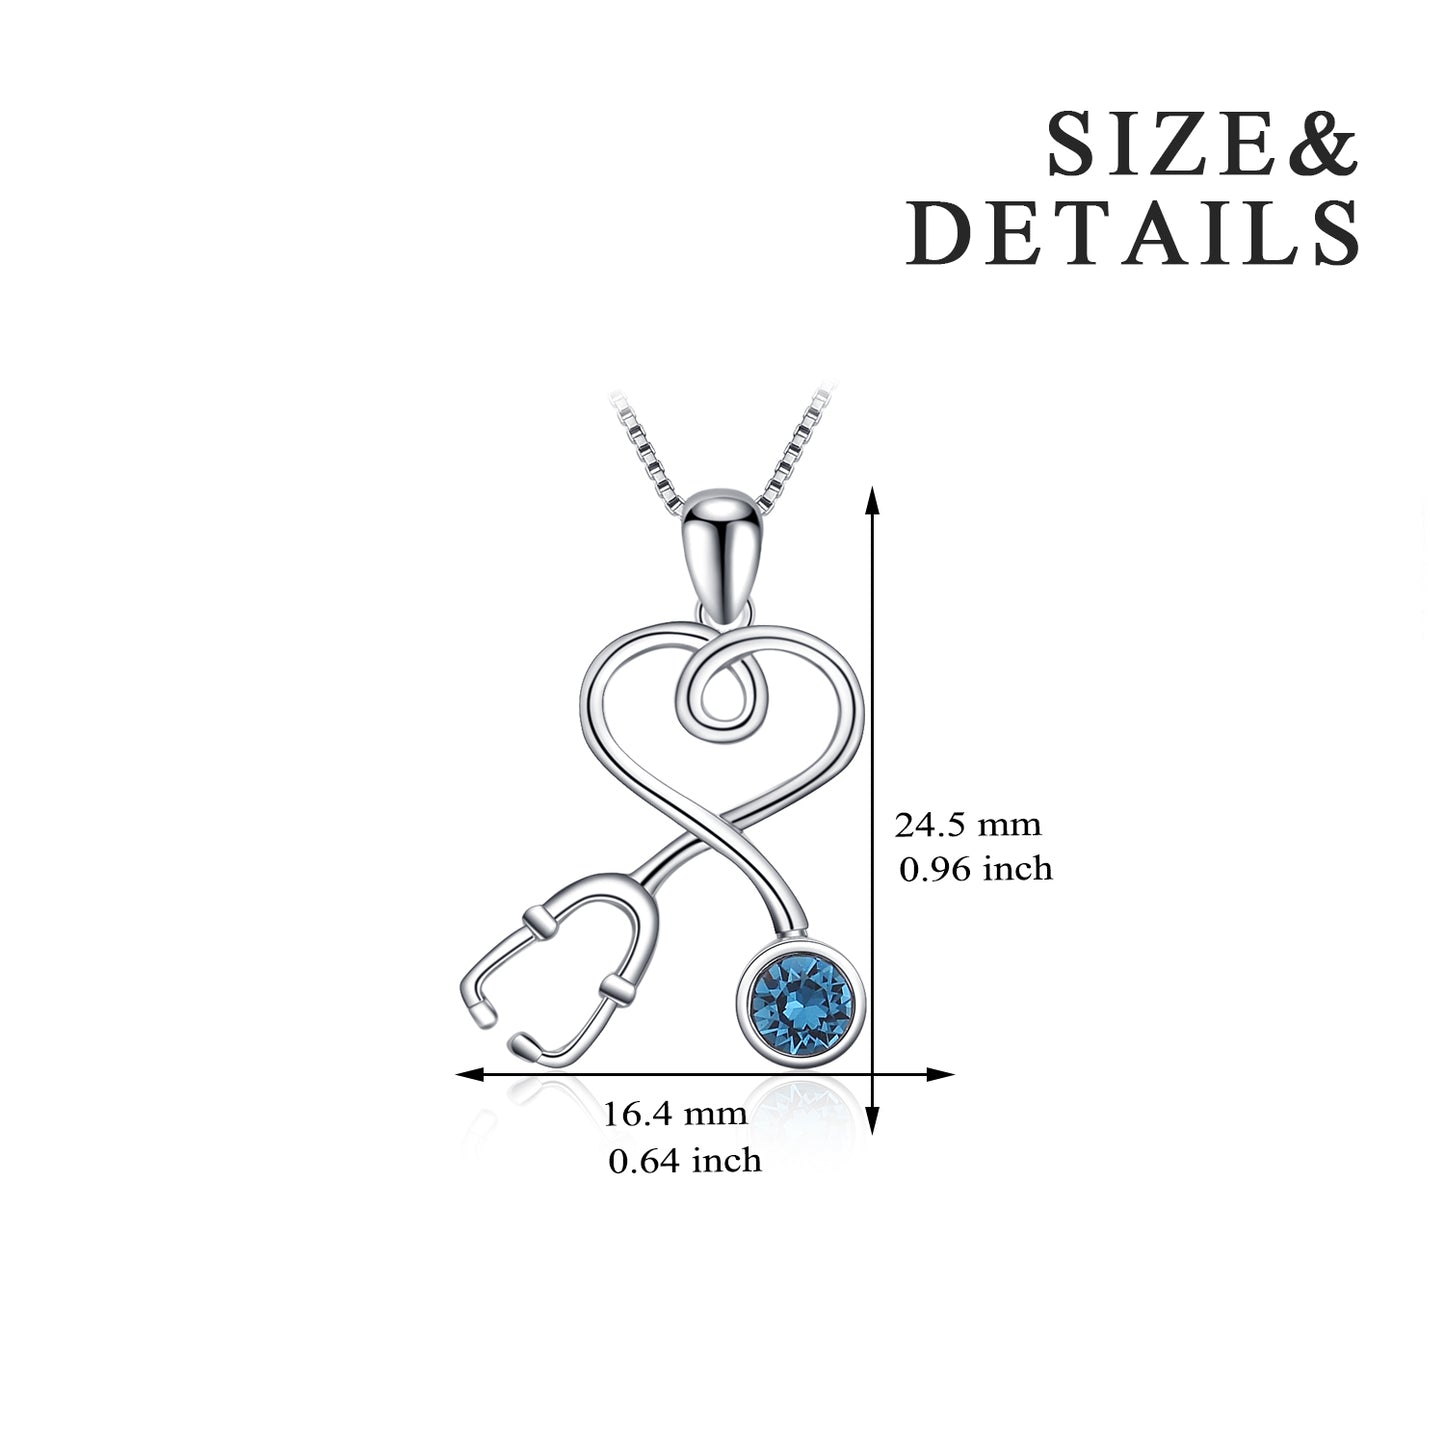 Nurse Doctor Stethoscope Necklace 925 Sterling Silver with Charm Pendant